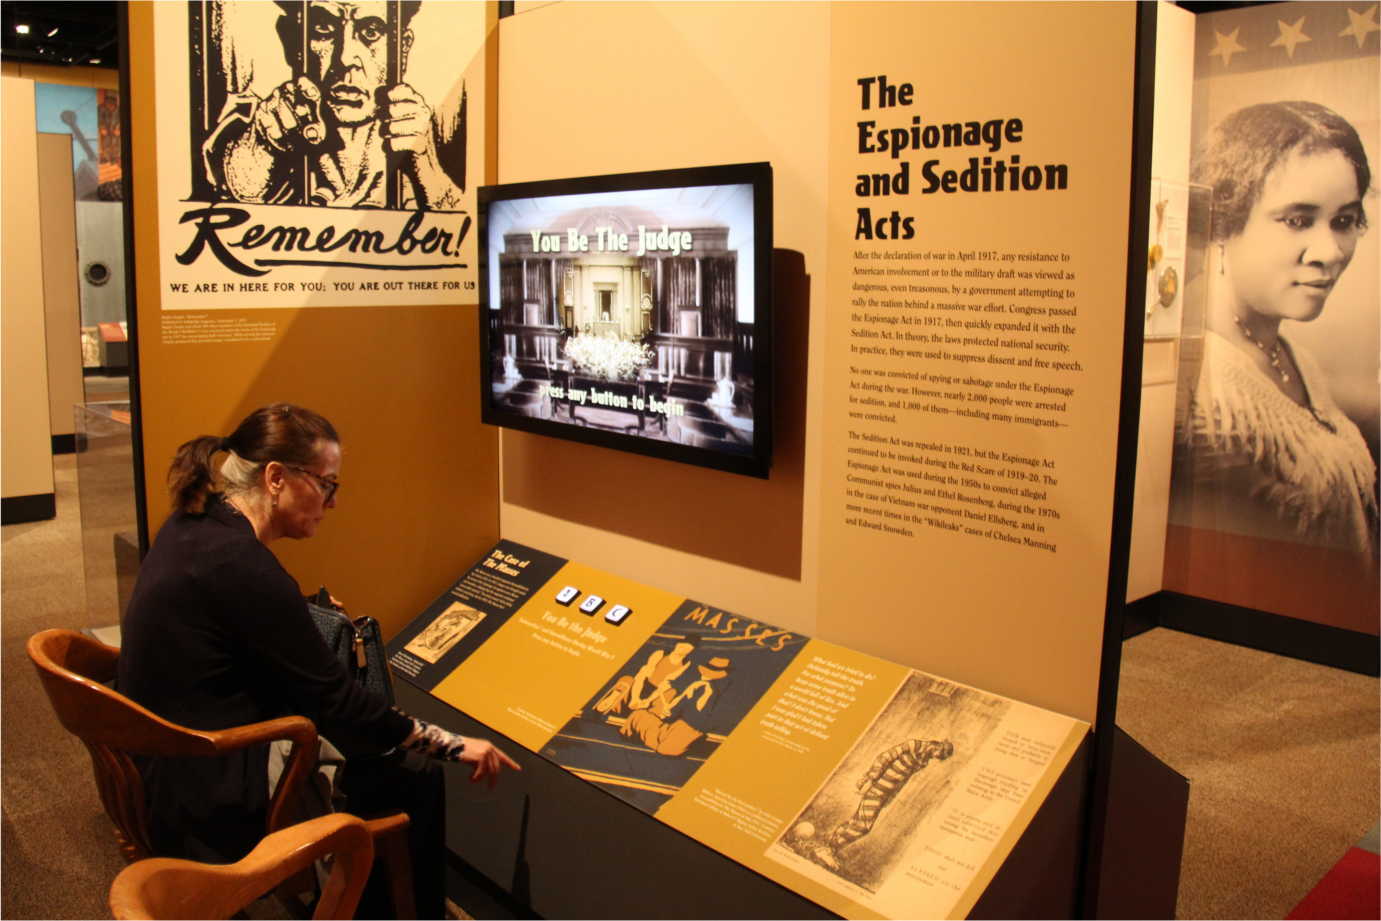 An exhibit interpreting the Espionage and Sedition Acts during World War I. Image courtesy of the Minnesota Historical Society.